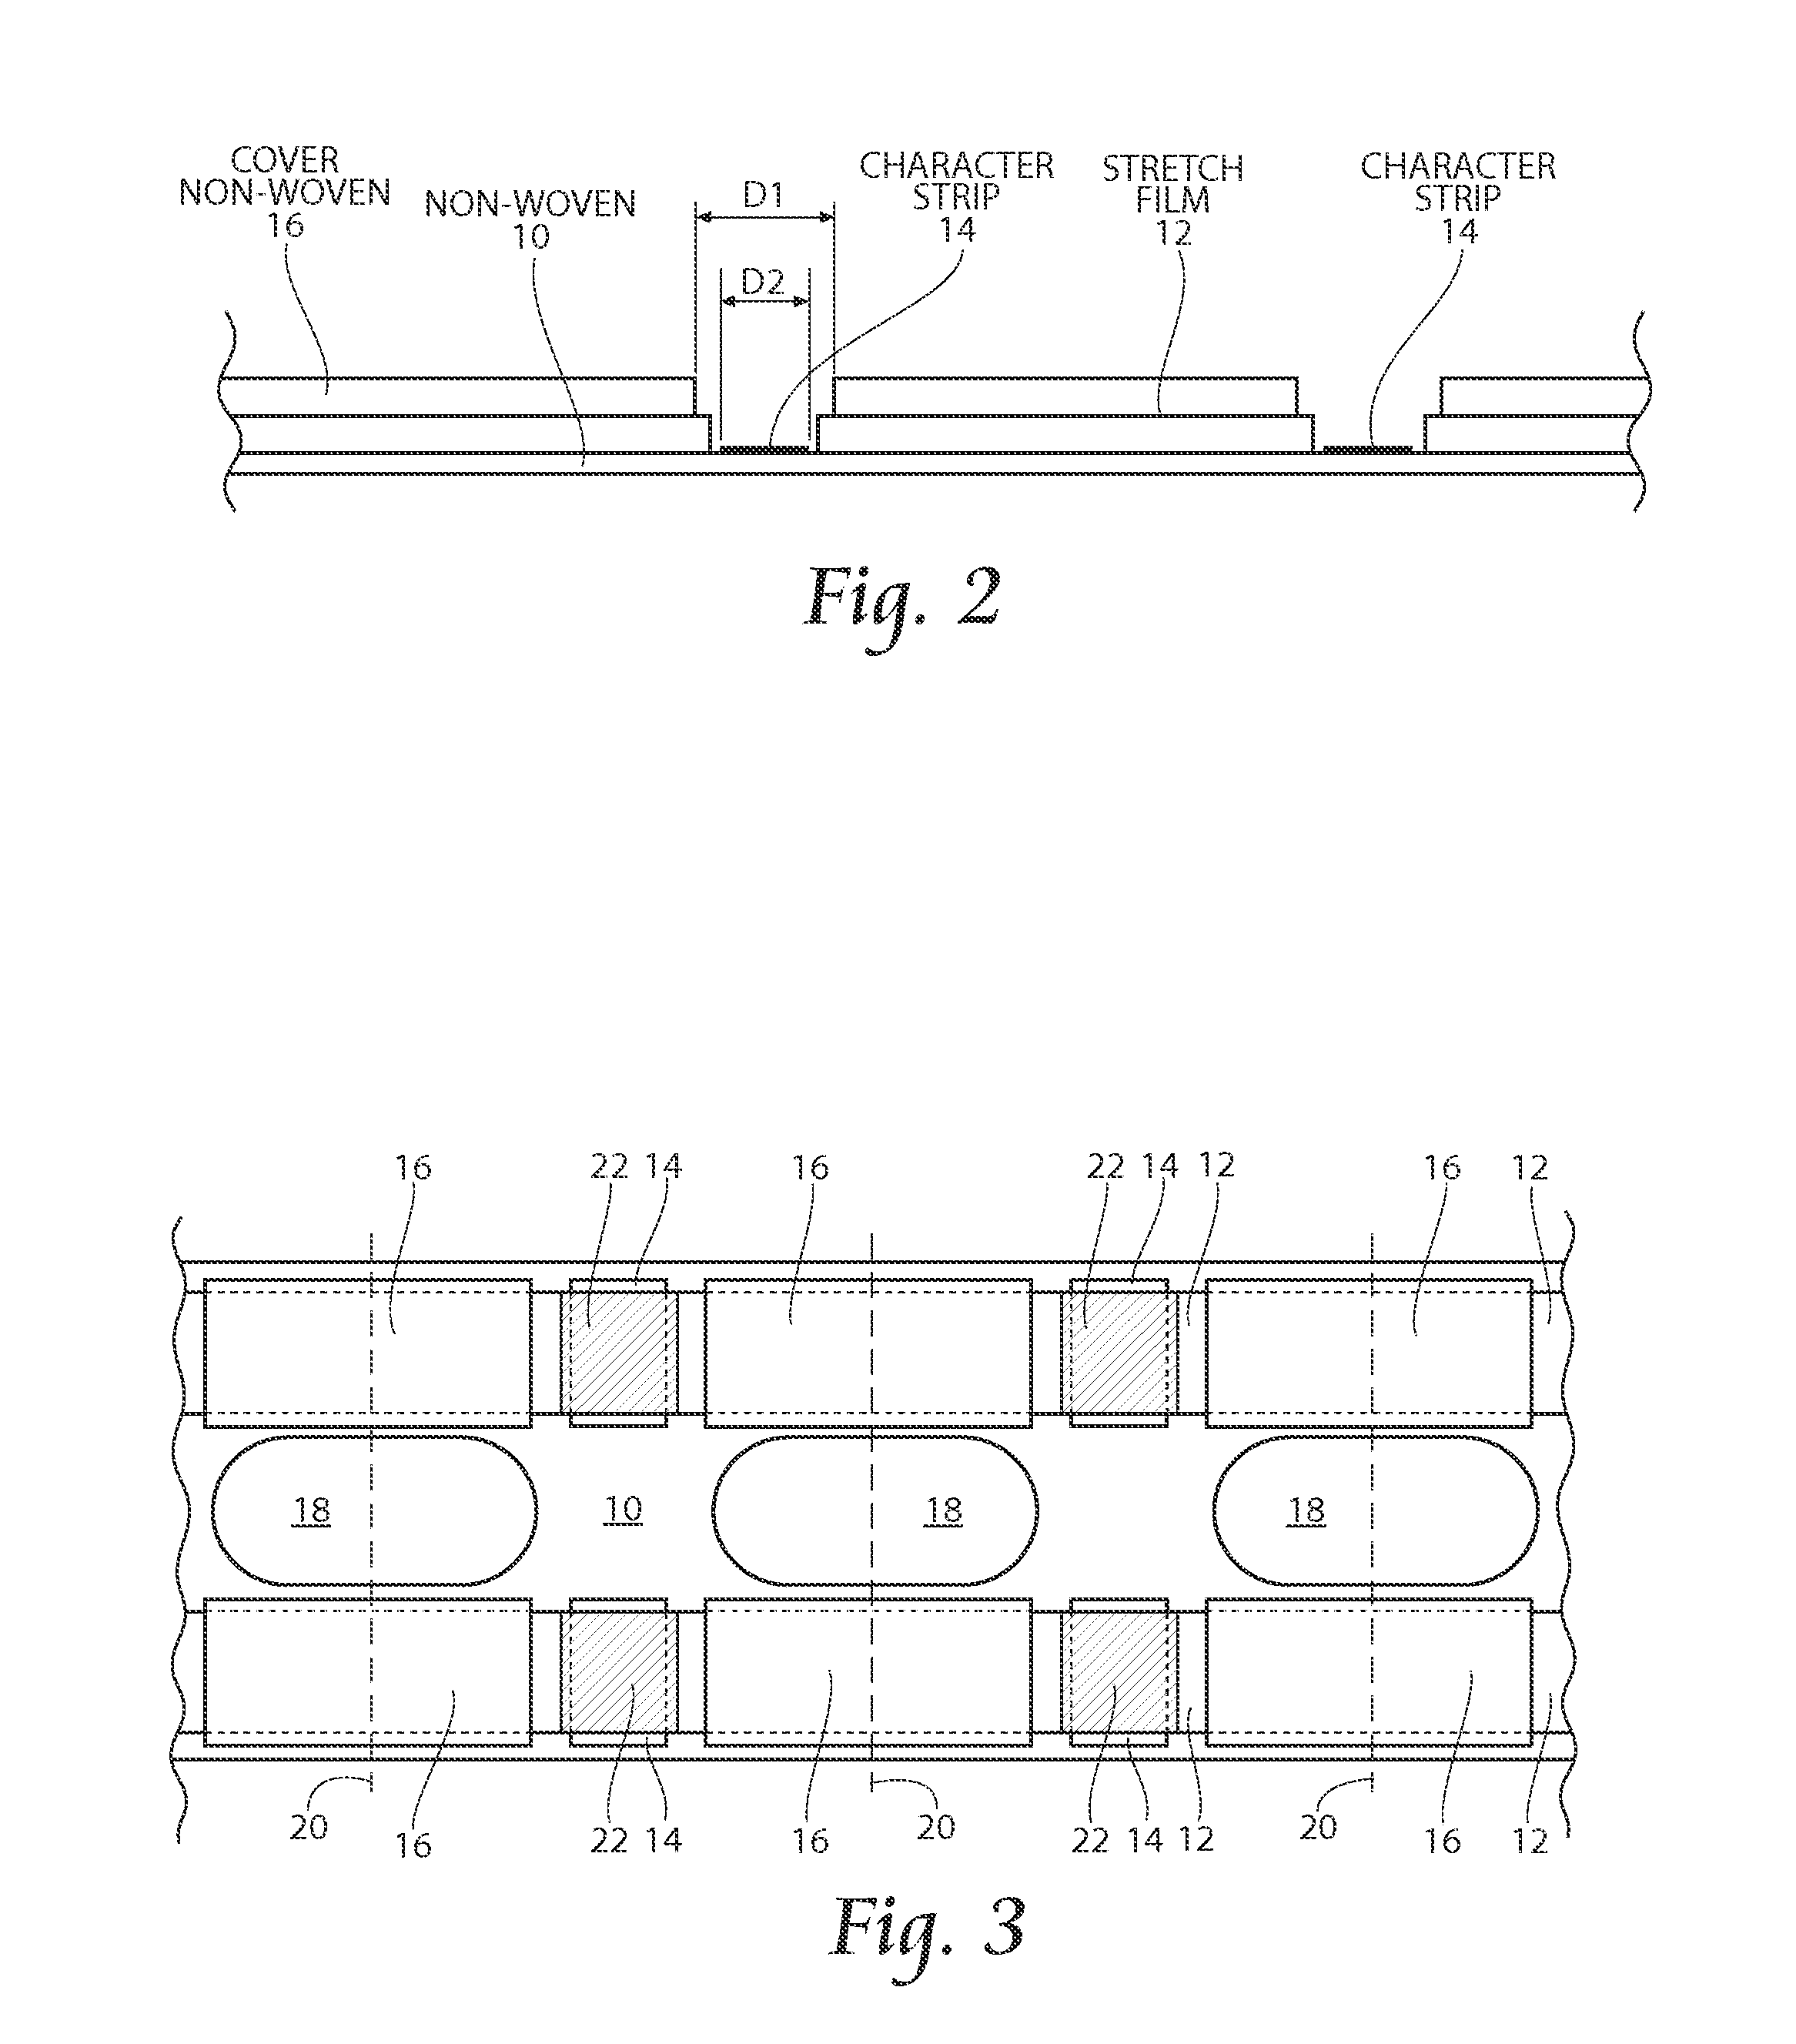 Method for producing absorbent article with stretch film side panel and application of intermittent discrete components of an absorbent article